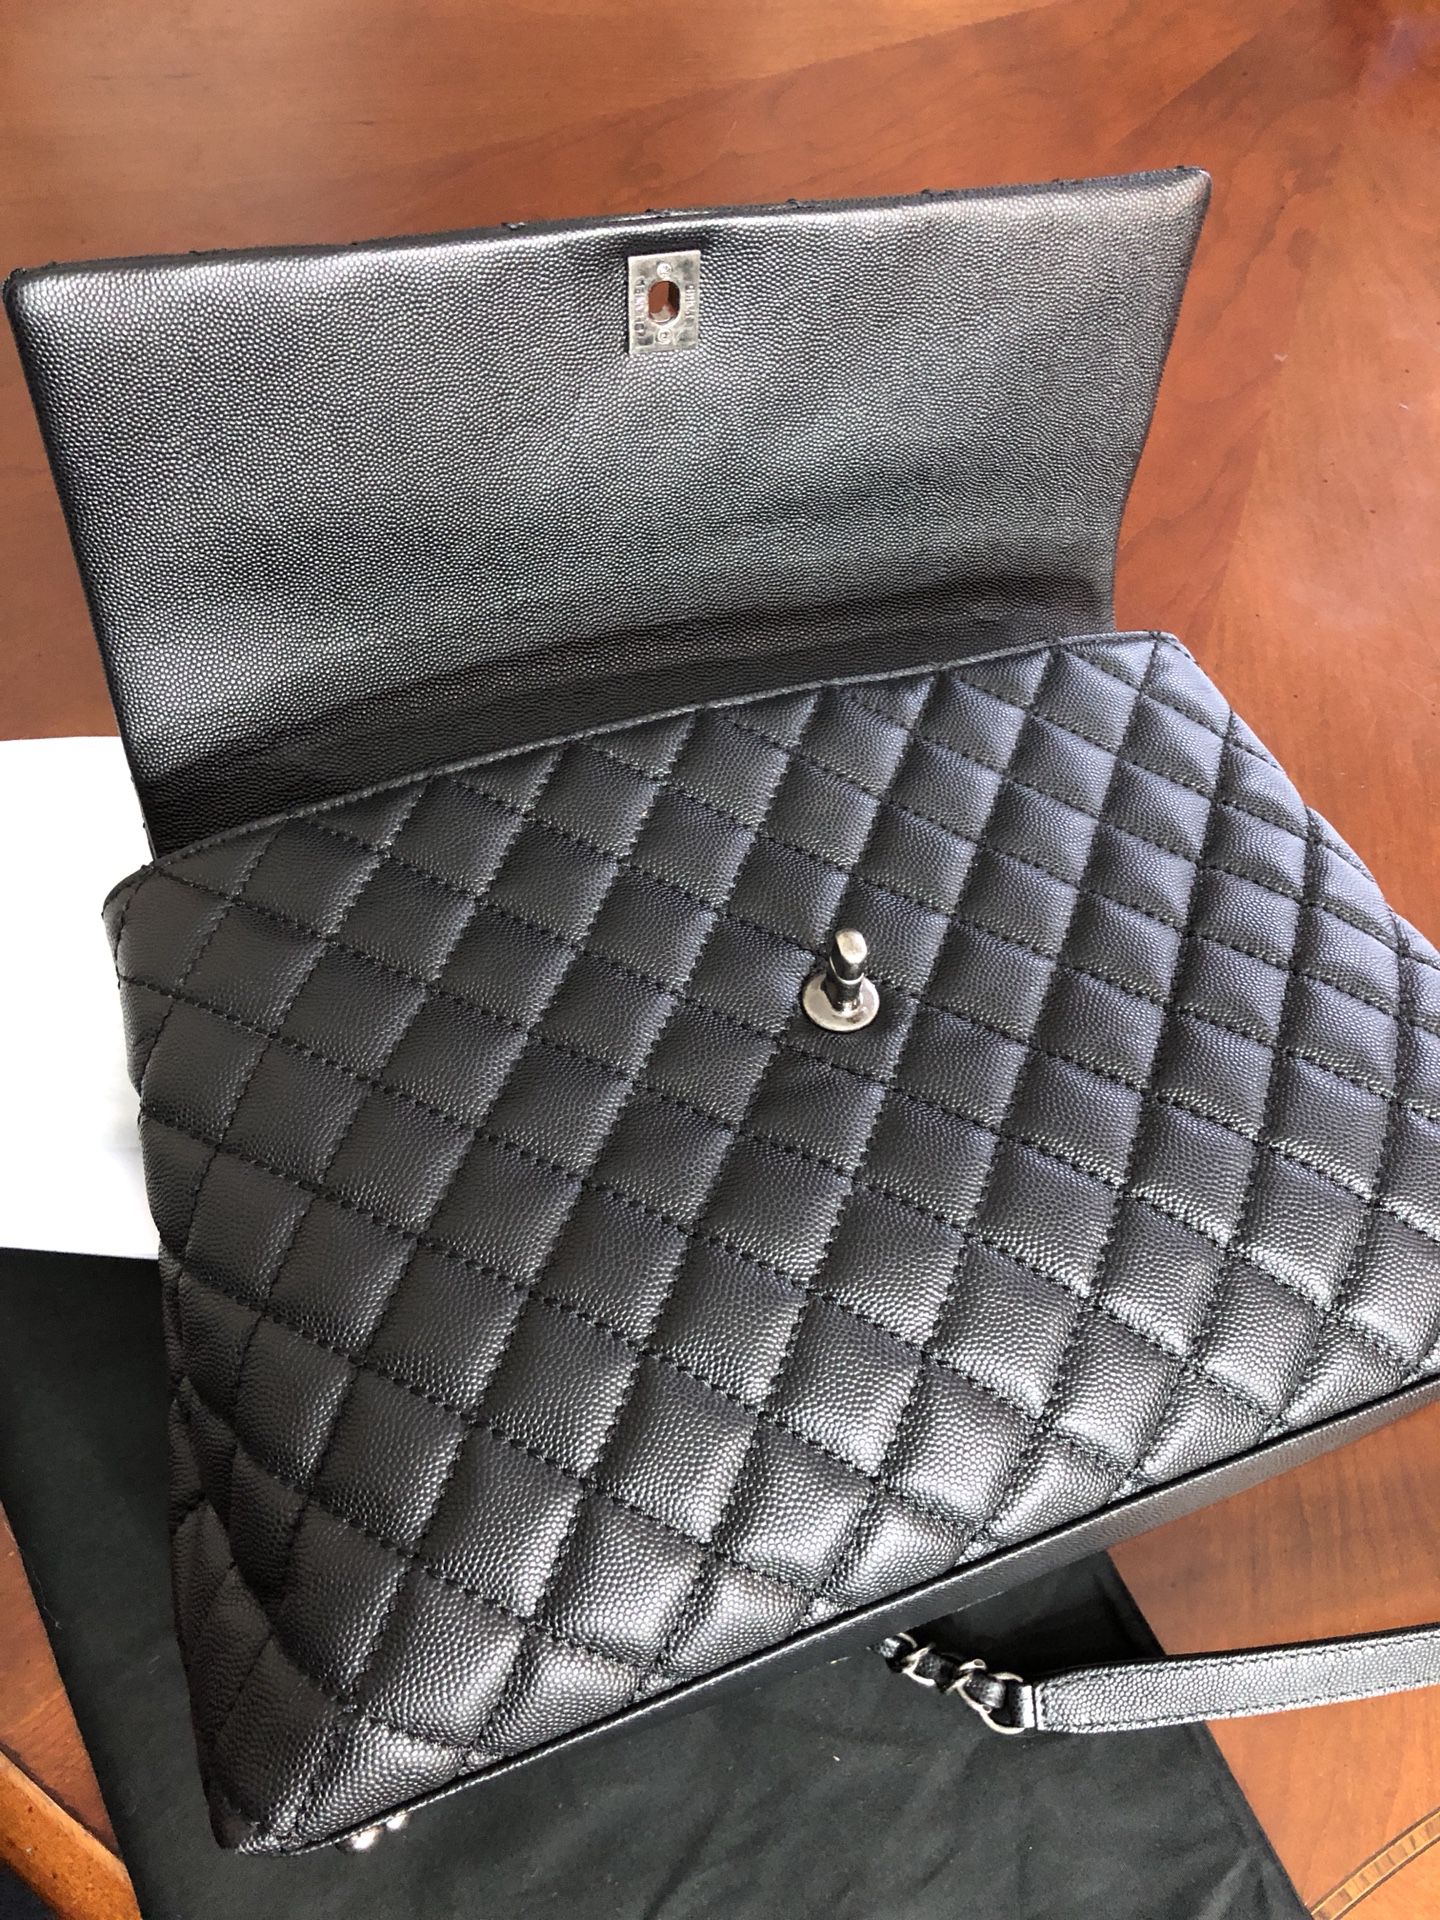 New Chanel large flap bag with top handle for Sale in Bellevue, WA